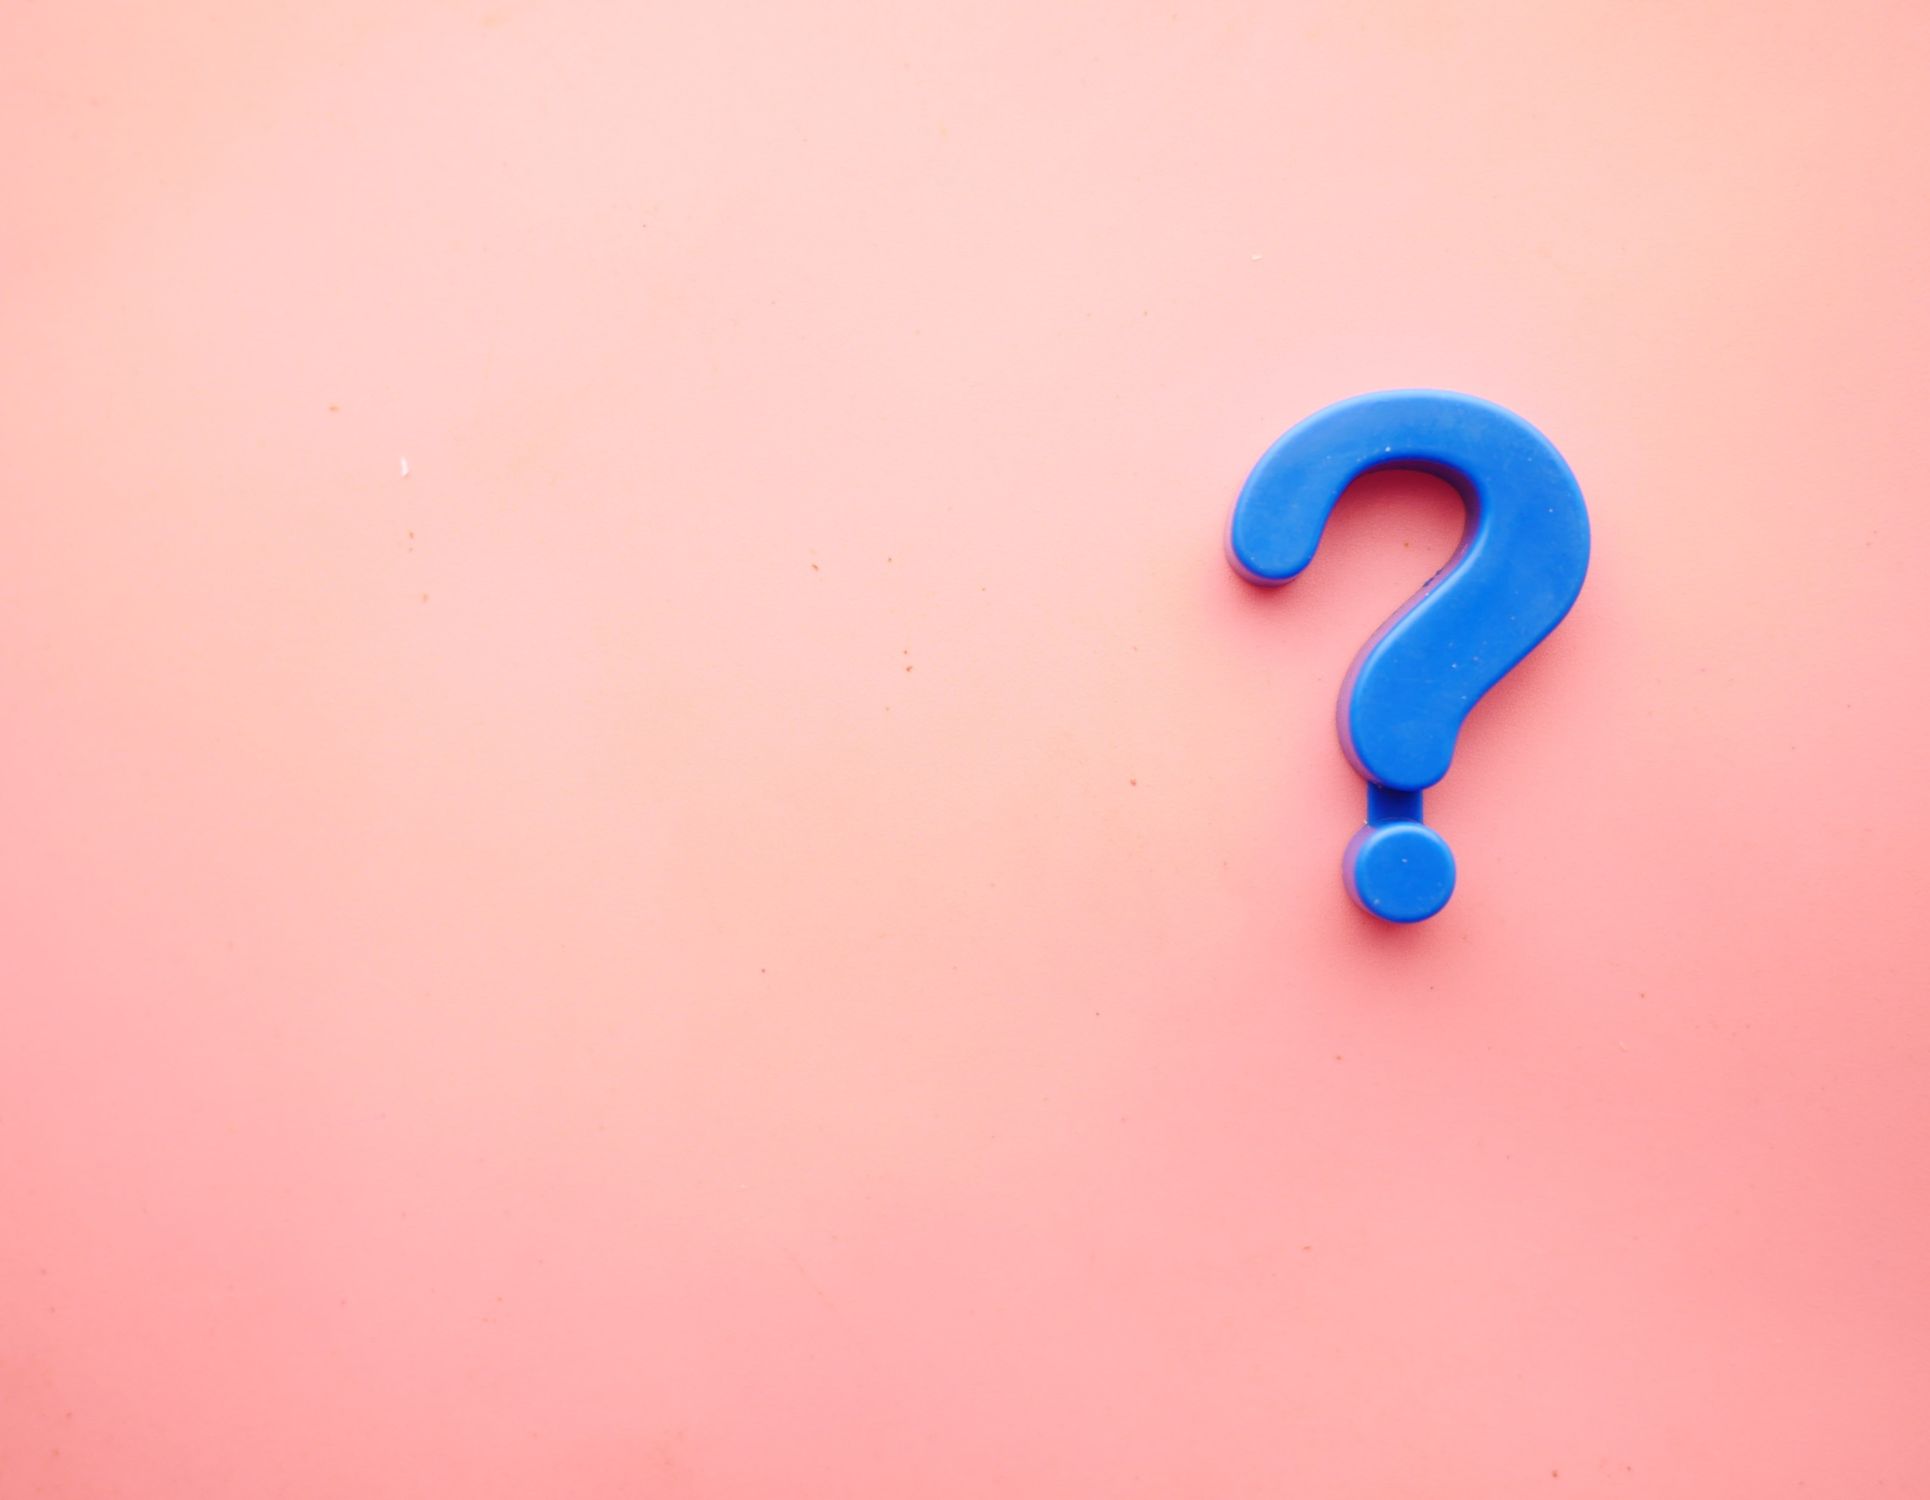 CredSpark launches Question Bank, question mark on a pink background